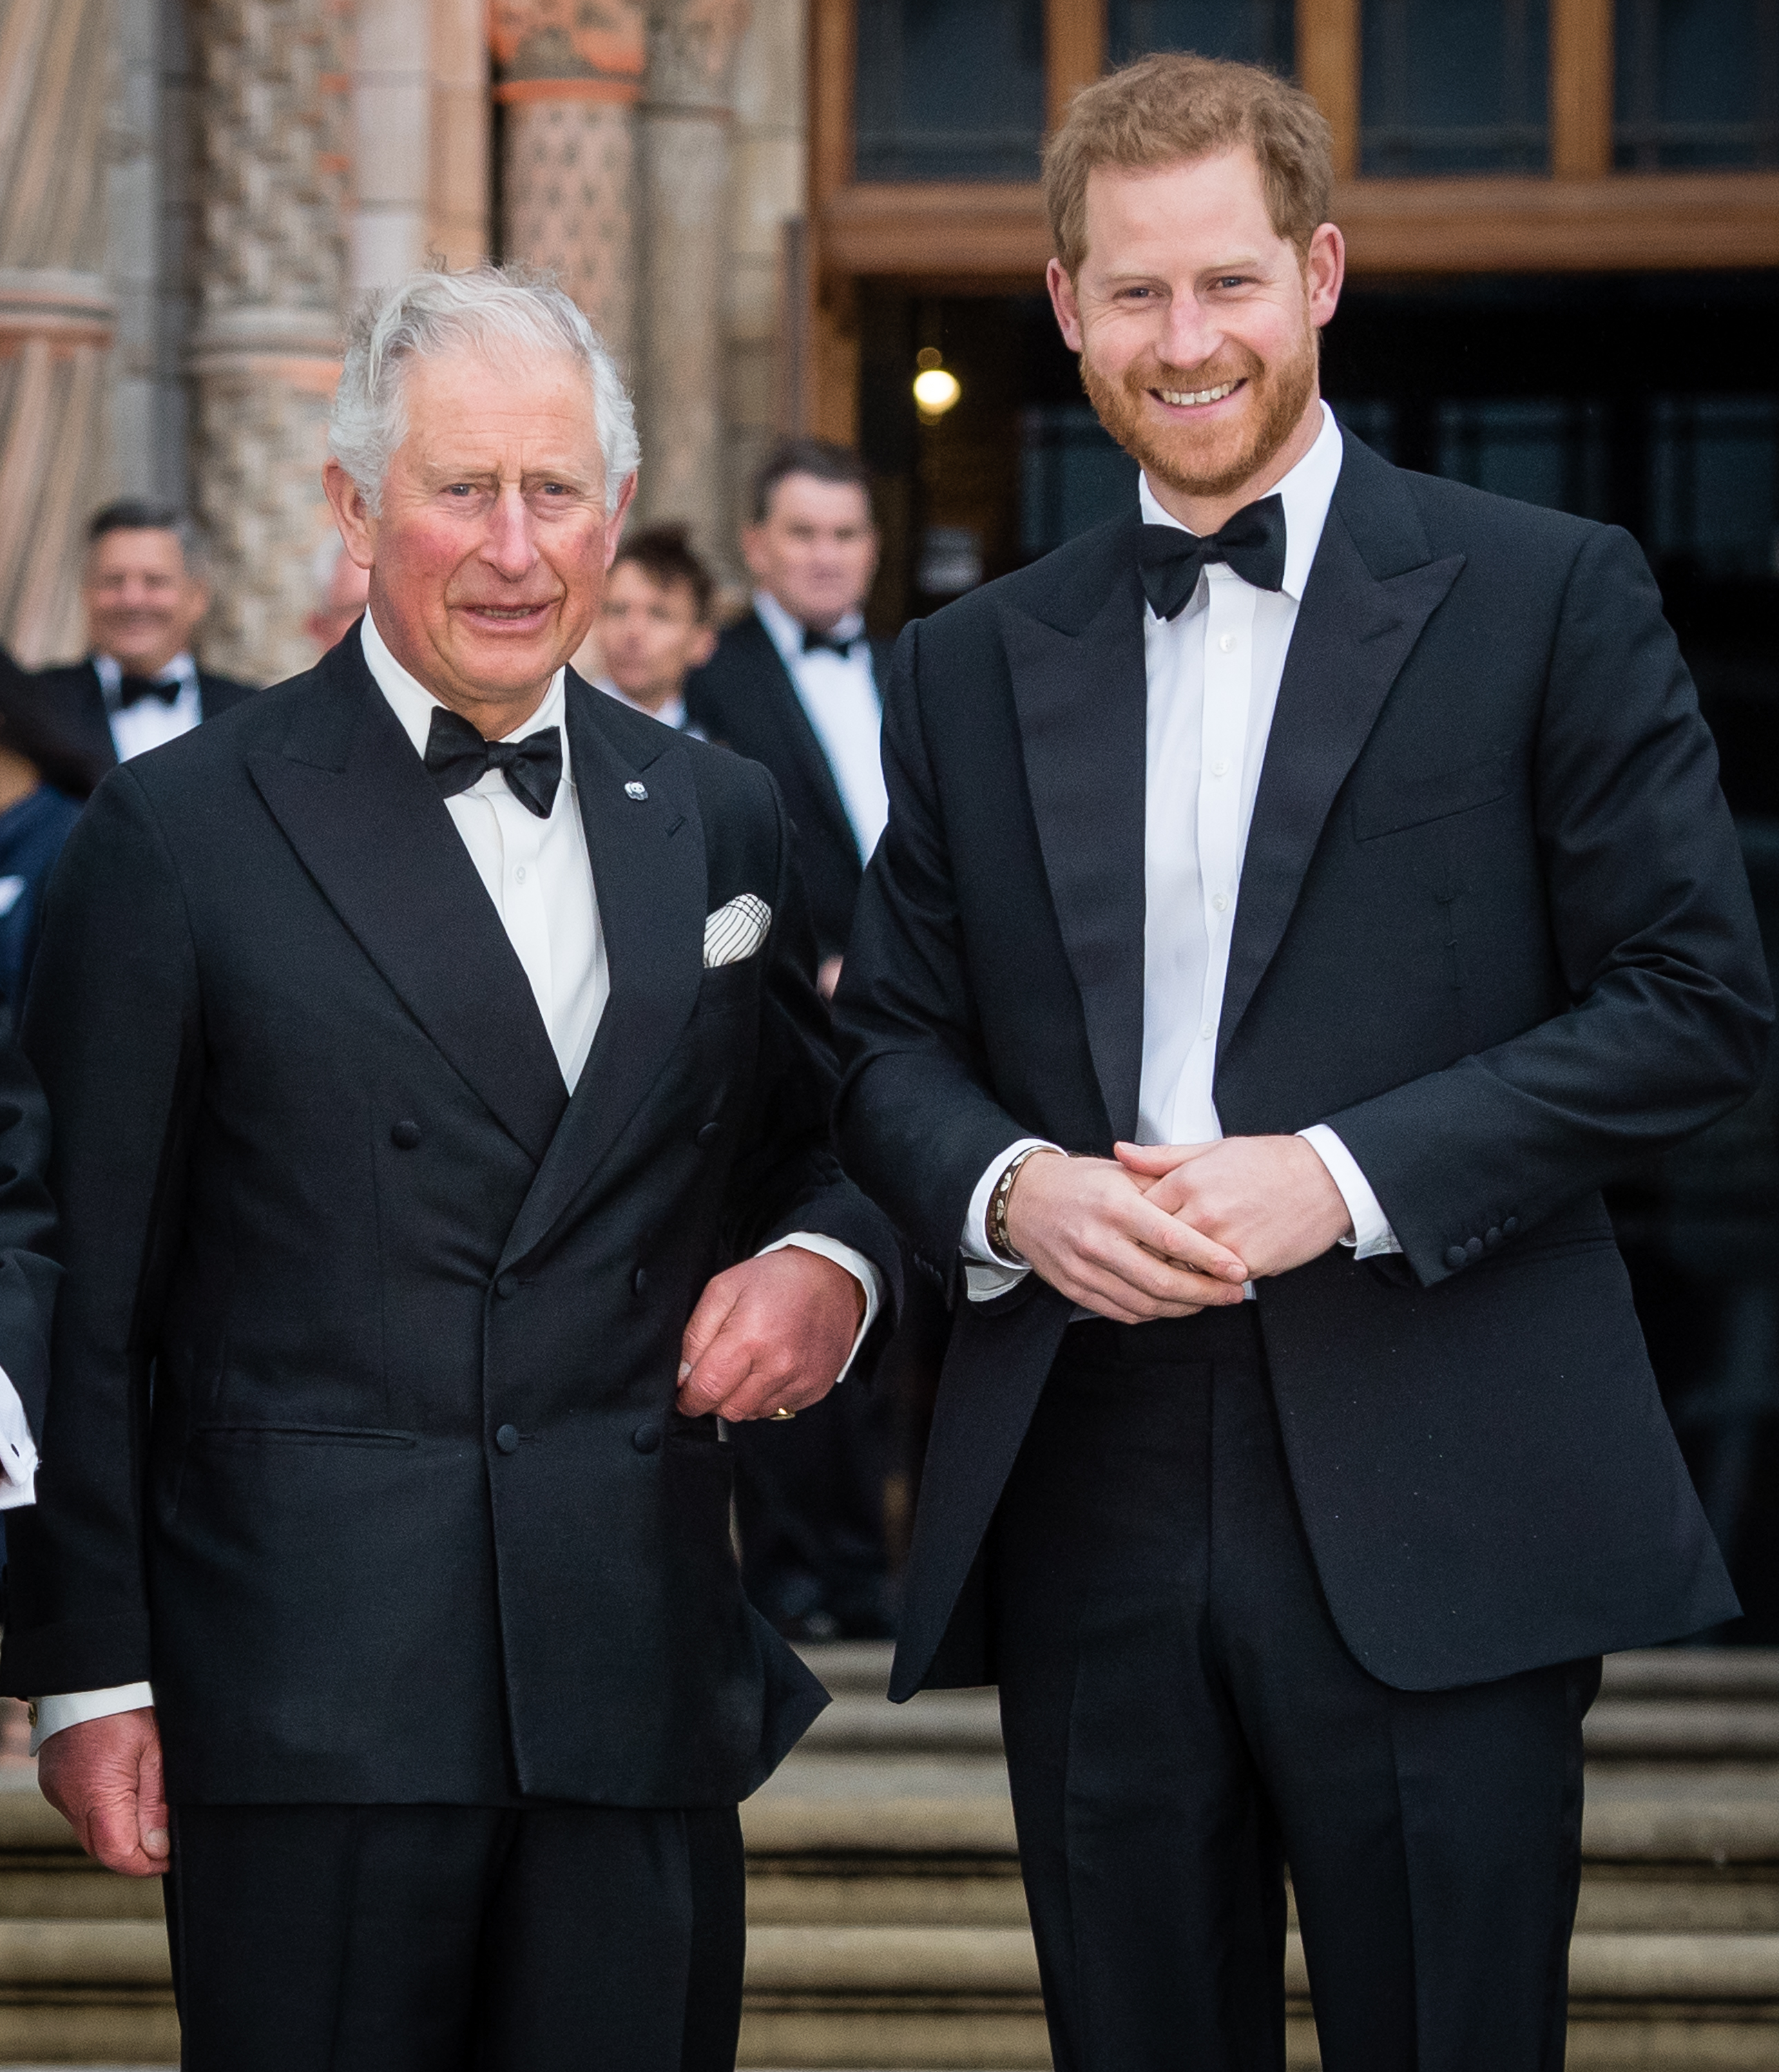 King Charles III and Prince Harry attend the "Our Planet" global premiere at Natural History Museum on April 4, 2019 in London, England. | Source: Getty Images